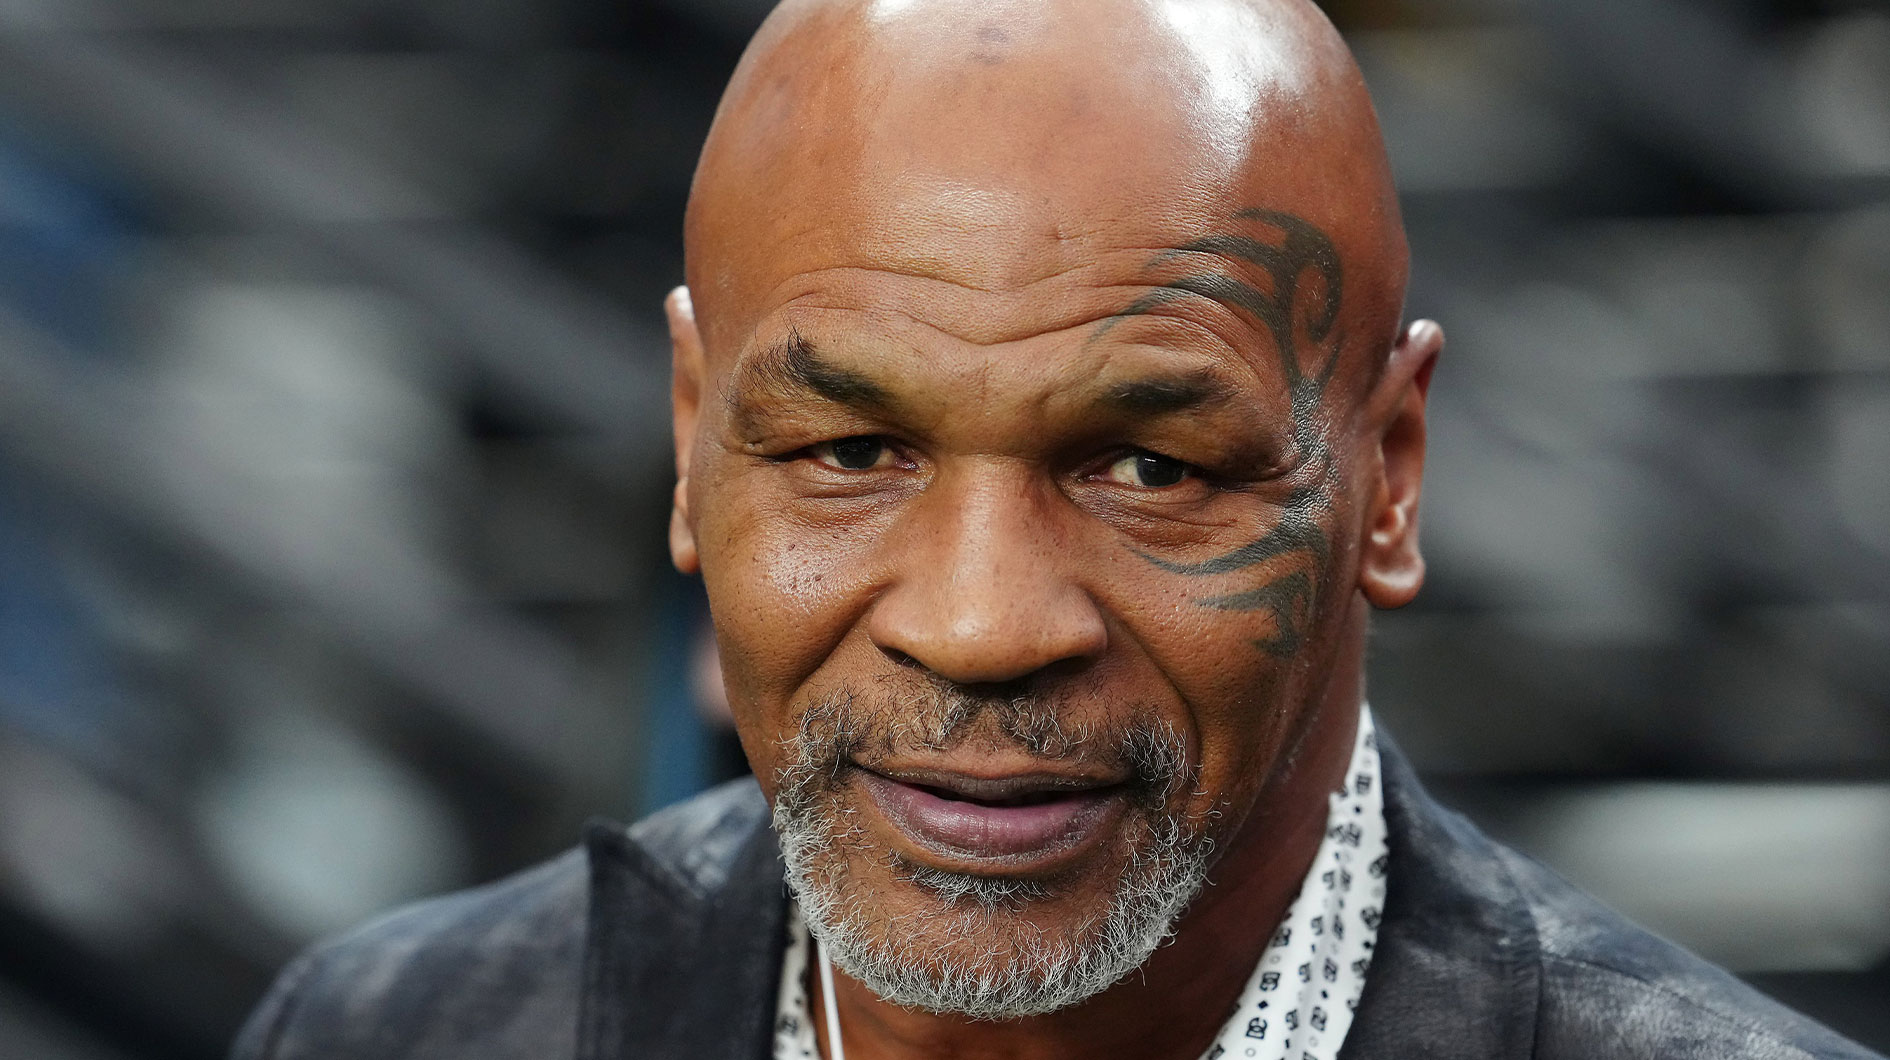 Mike Tyson poses for a photo on the sidelines before the start of a game between the Las Vegas Raiders and the Pittsburgh Steelers at Allegiant Stadium. 